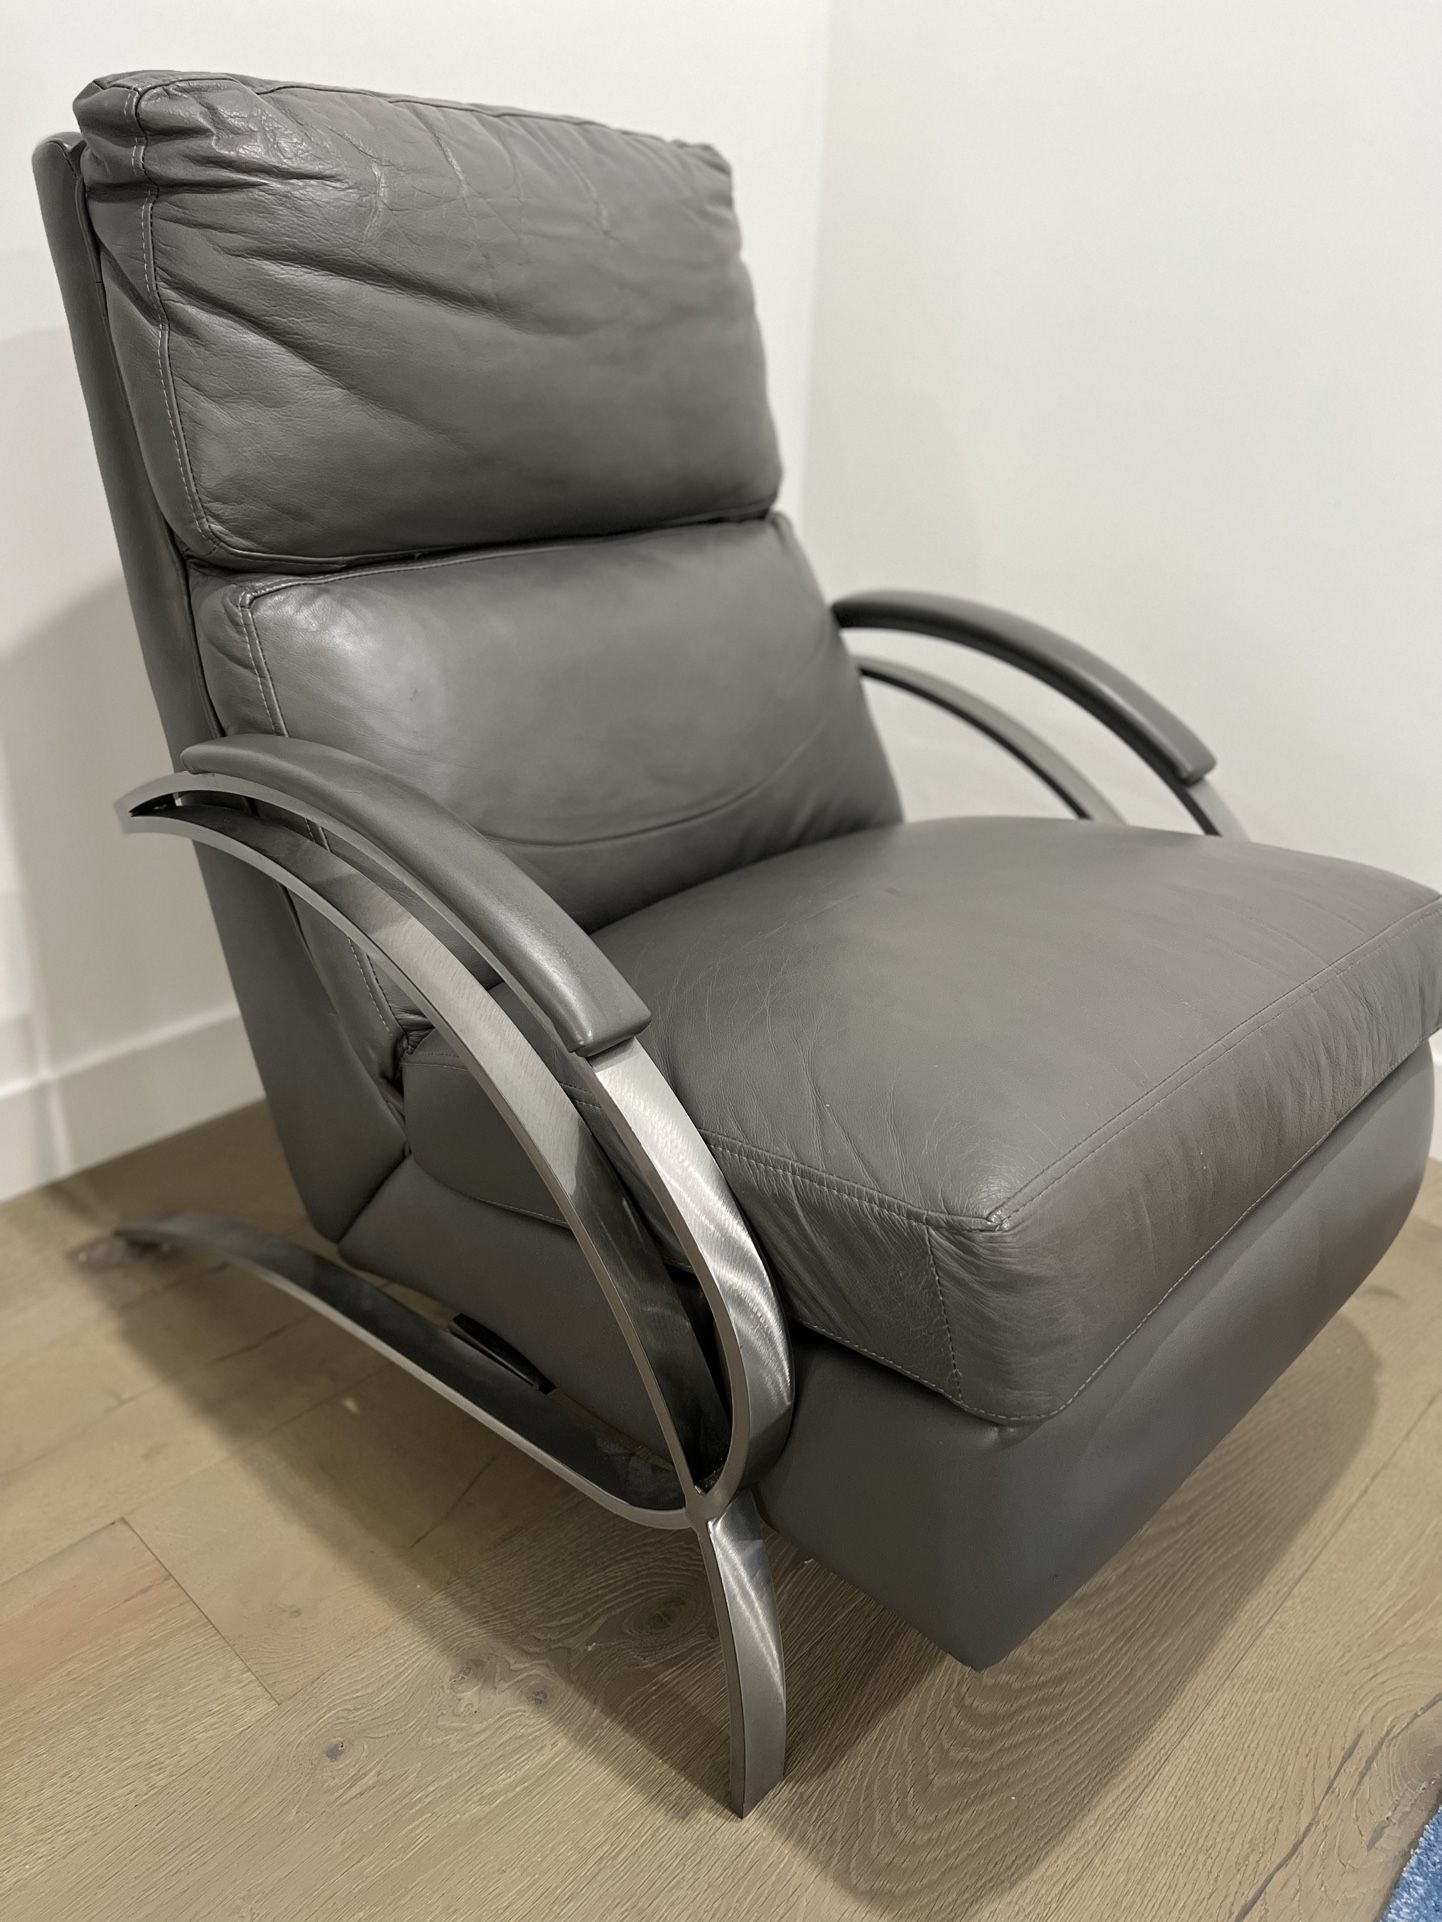 Pair Recliner Chairs